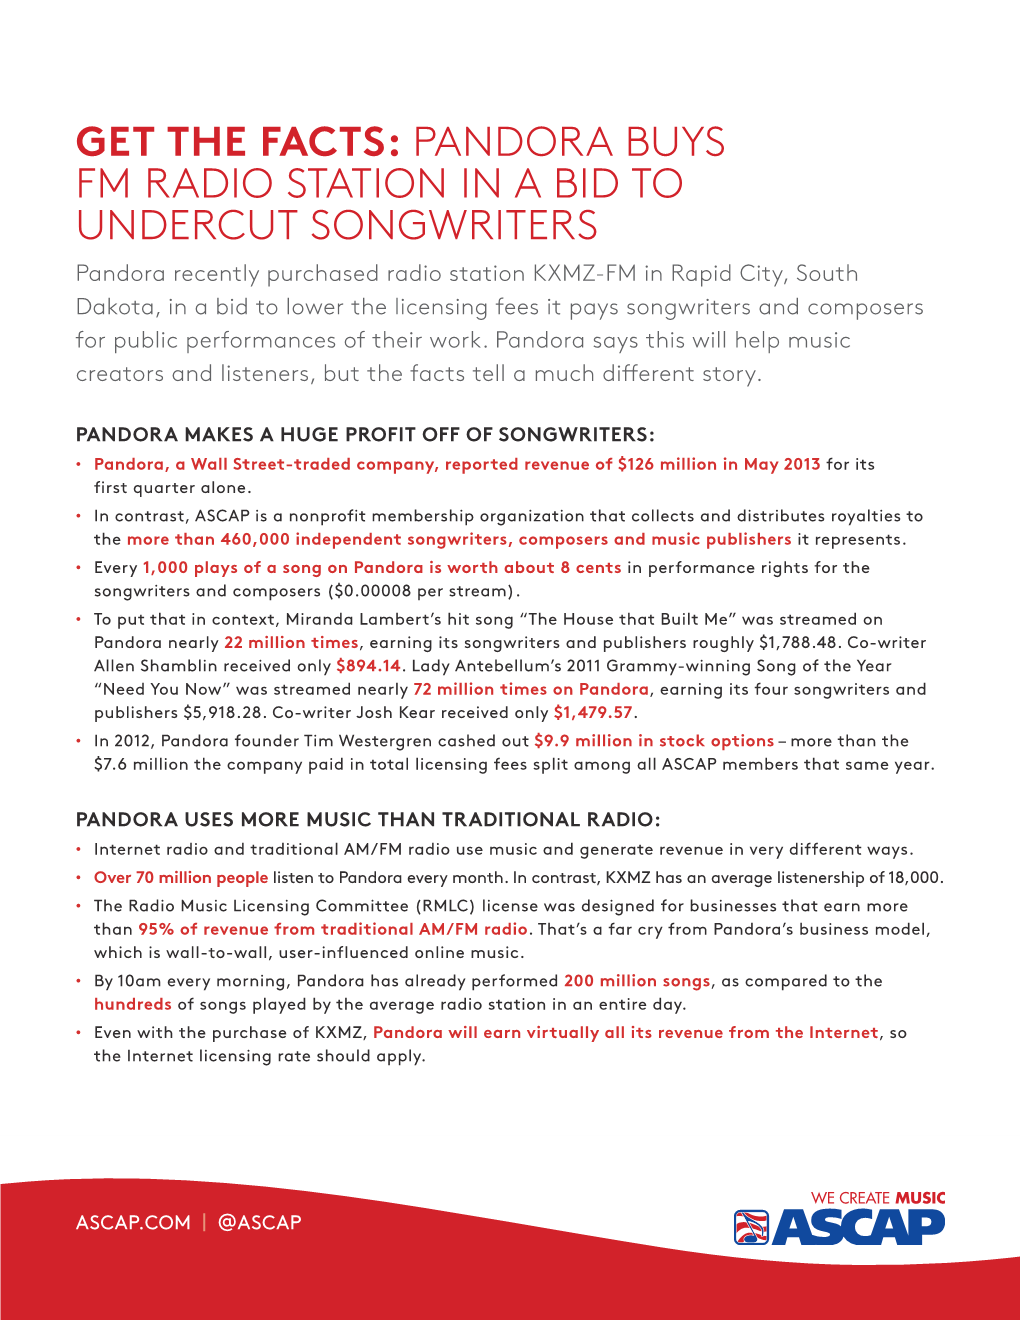 Get the Facts: Pandora Buys Fm Radio Station in A